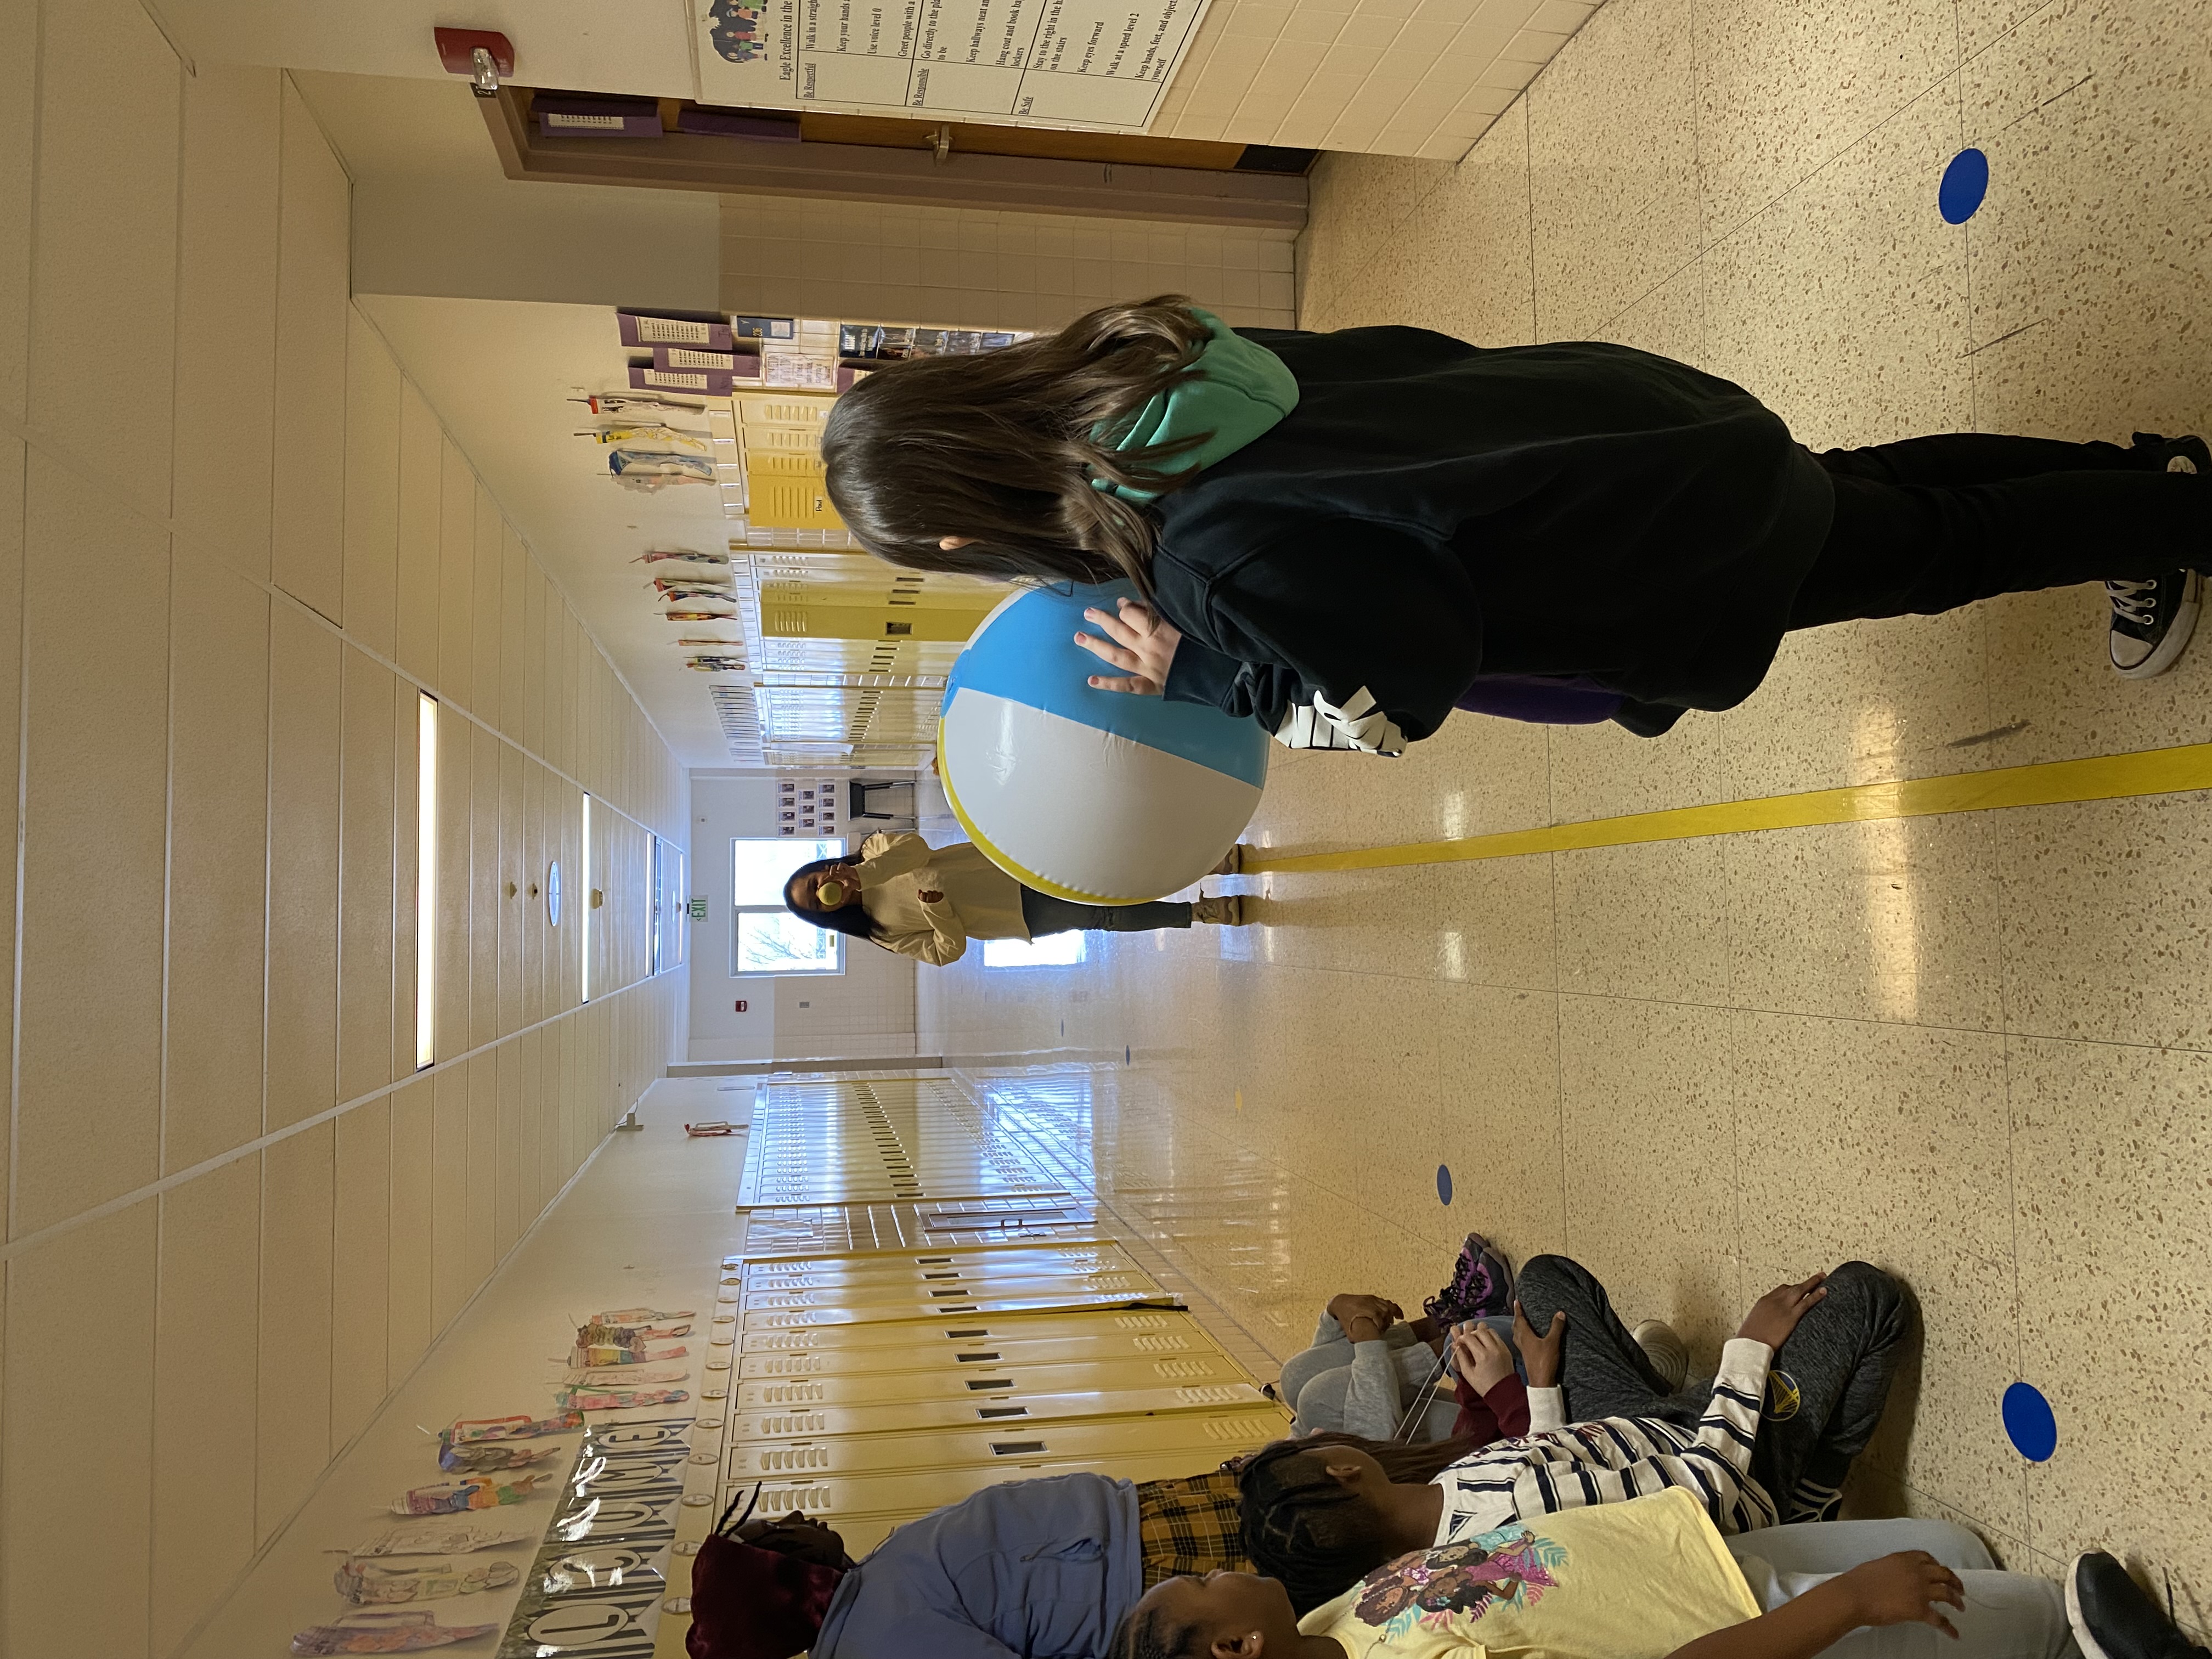 Students doing eclipse experiment in hallway